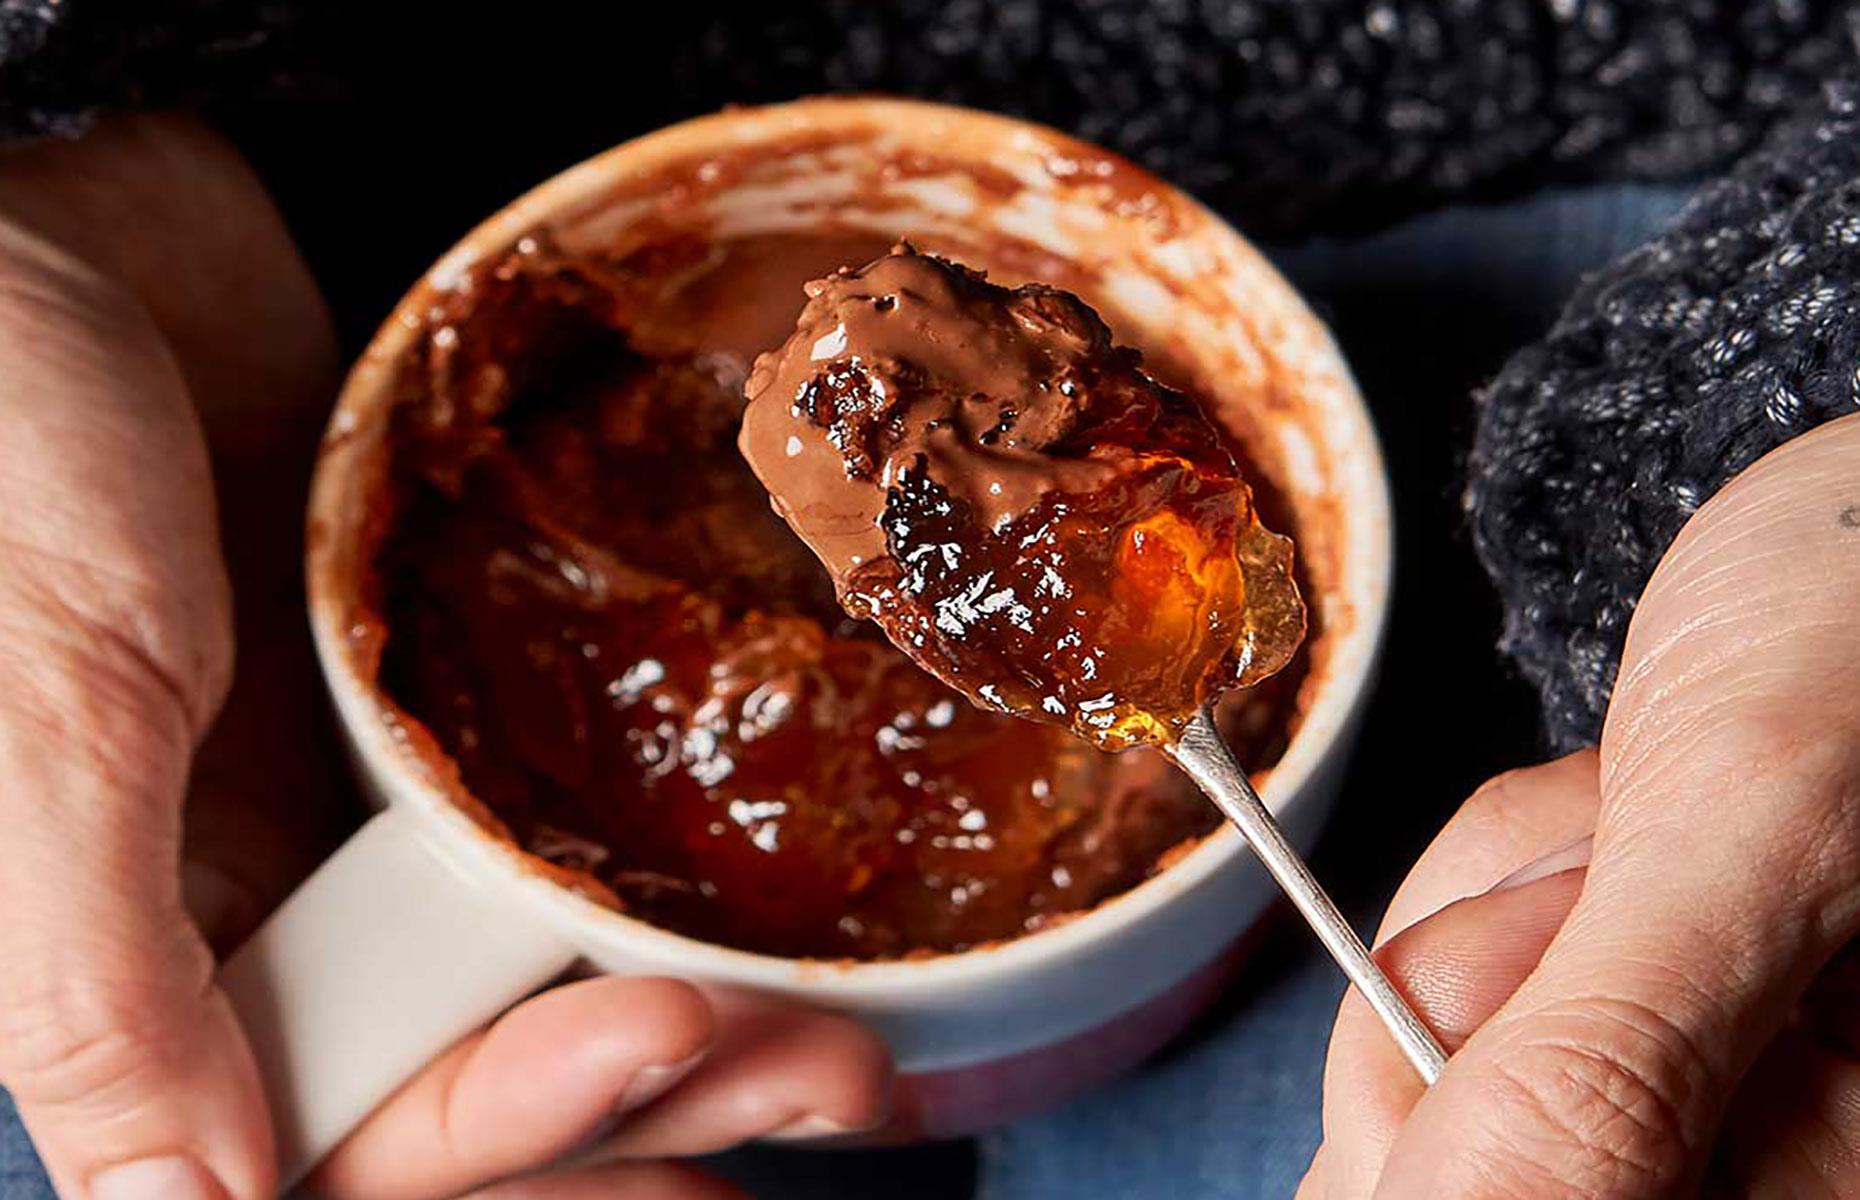 <p>Mug cakes are a shortcut to something sweet anyway, but this recipe also makes use of two clever ingredients for maximum flavor. Marmalade adds a pleasing sweet-bitter hit of orange and chocolate hazelnut spread (like Nutella) adds a rich, chocolatey note.</p>  <p><strong><a href="https://www.lovefood.com/recipes/96420/jack-monroe-jaffa-cake-mug-pudding-recipe">Get the recipe for chocolate orange mug cake here</a></strong></p>